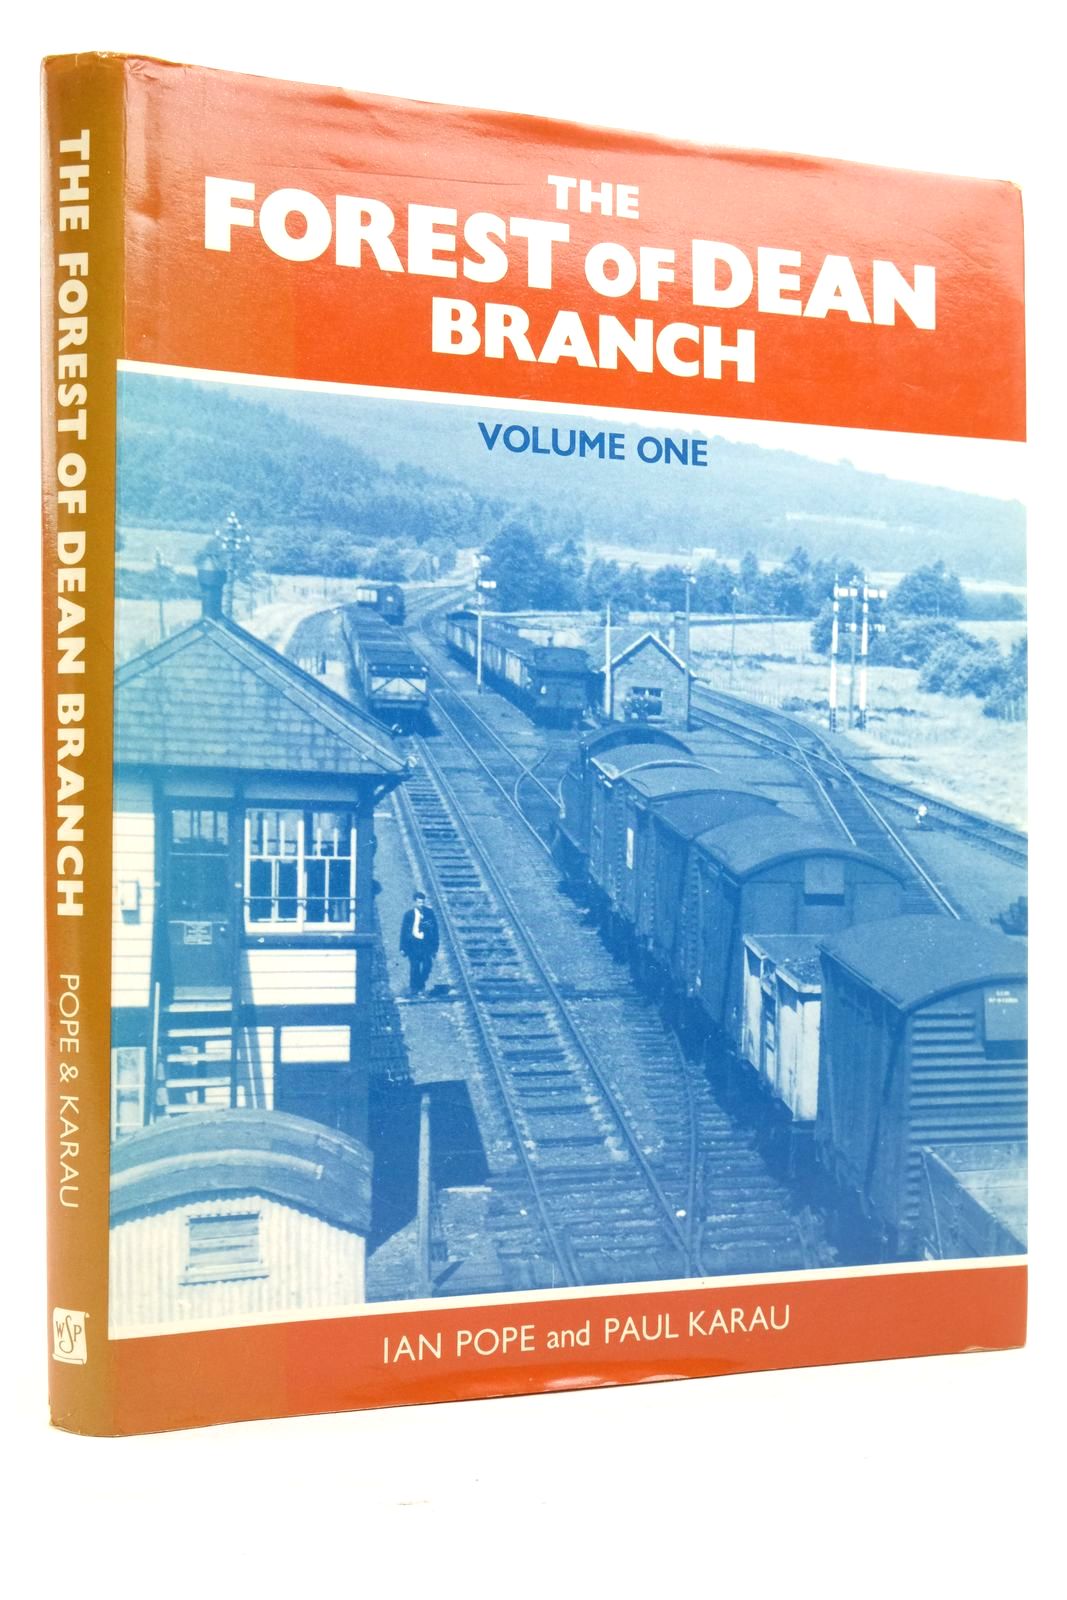 The Forest of Dean Branch Volume One